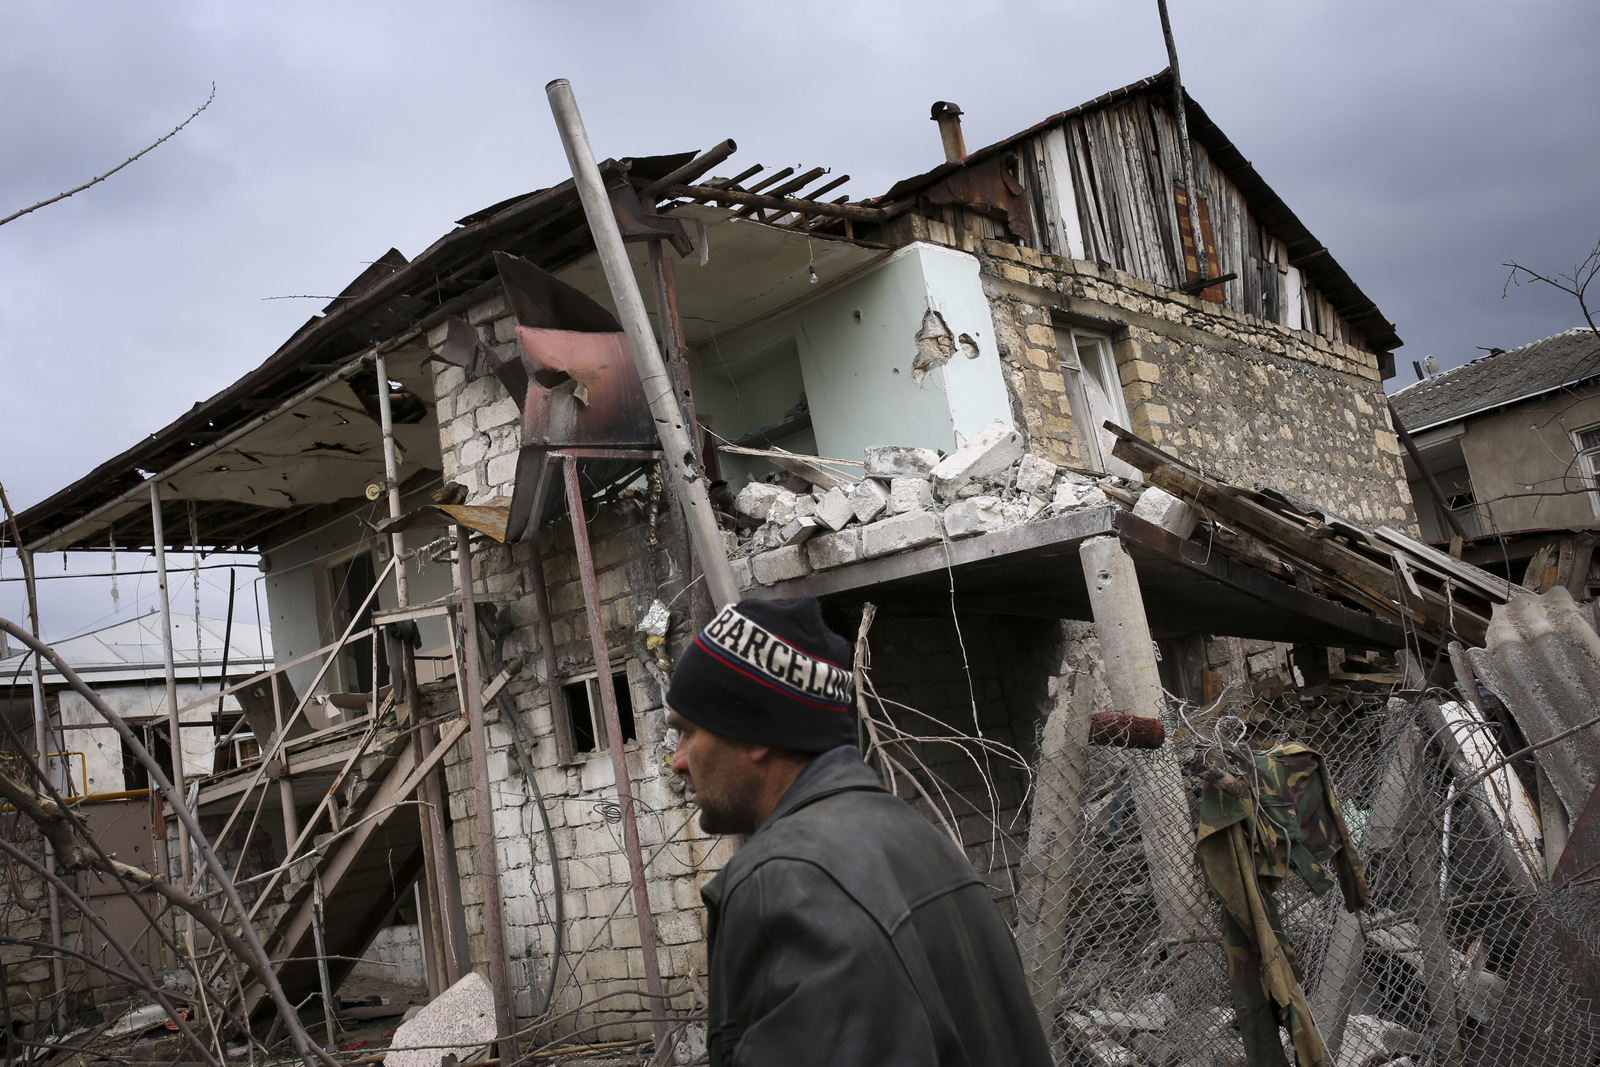 Martakert province in the separatist region of Nagorno-Karabakh, Azerbaijan, Monday, April 4, 2016. Fighting raged Monday around Nagorno-Karabakh, with Azerbaijan saying it lost three of its troops in the separatist region while inflicting heavy casualties on Armenian forces and the Armenian president warning that the hostilities could slide into a full-scale war. (Vahan Stepanyan, PAN Photo via AP)